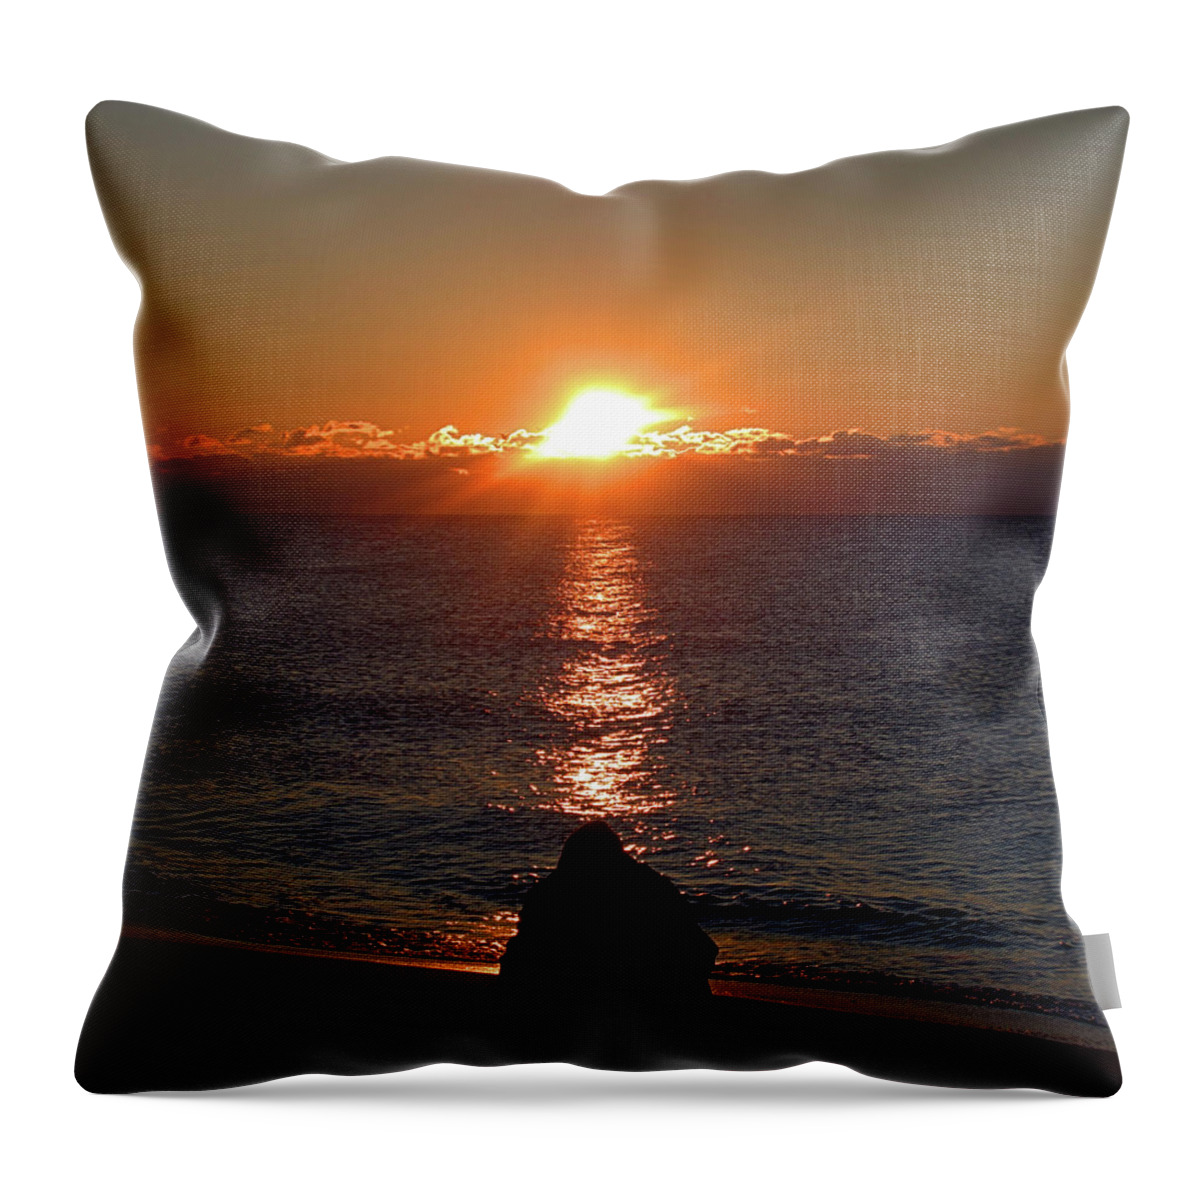 Seas Throw Pillow featuring the photograph Sun Chasers I I I by Newwwman